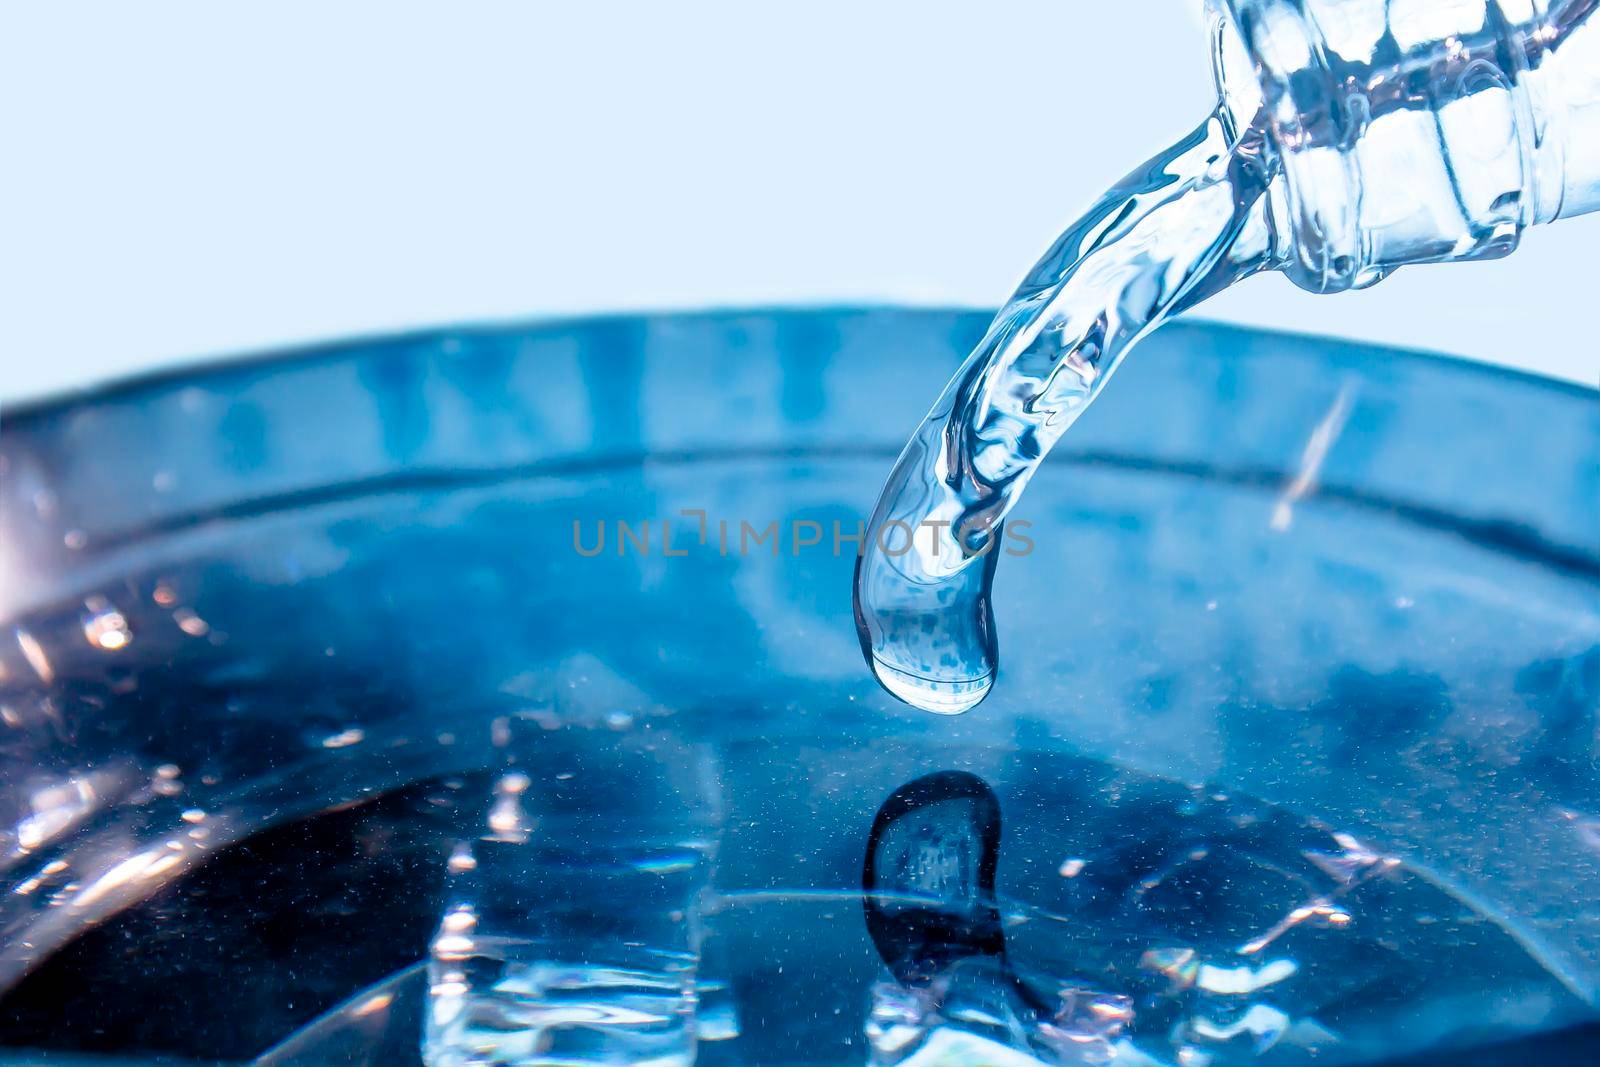 A flowing stream of blue water.A stream of blue water pours from the neck of a glass bottle.Frozen water drop photographed at high speed.Slow dripping of liquid with air bubbles.Frozen liquid splashes